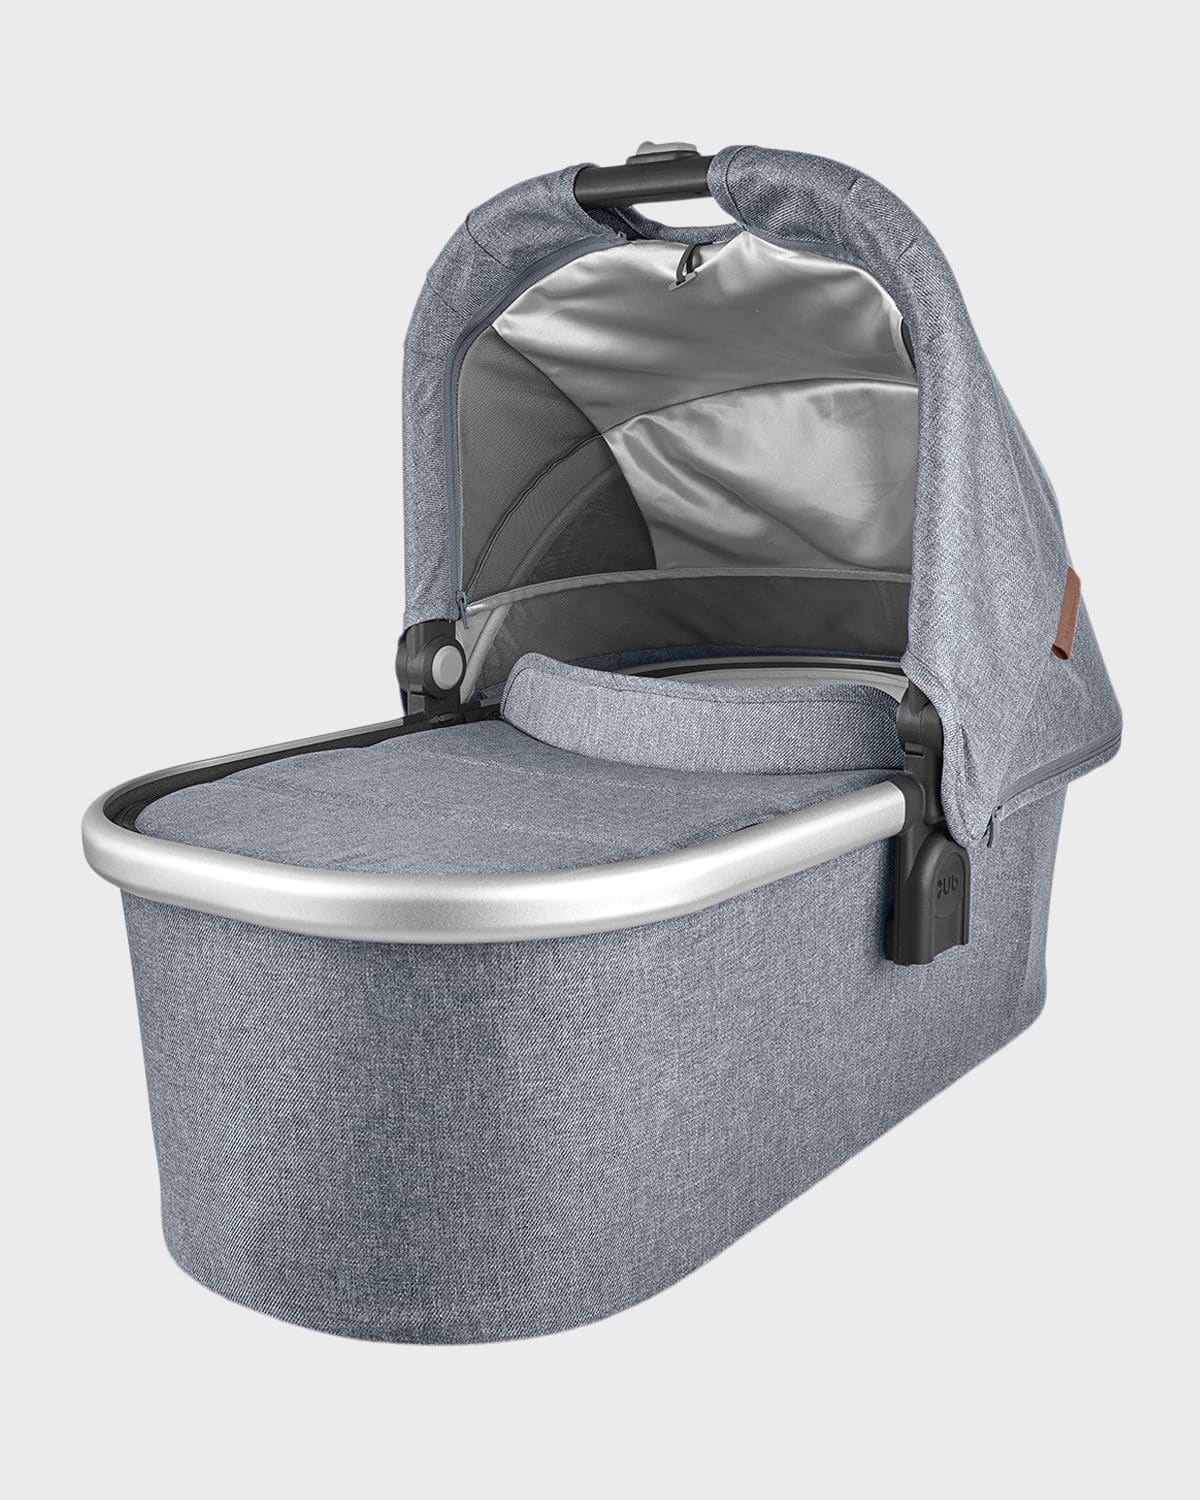 Uppababy Bassinet In Gregory